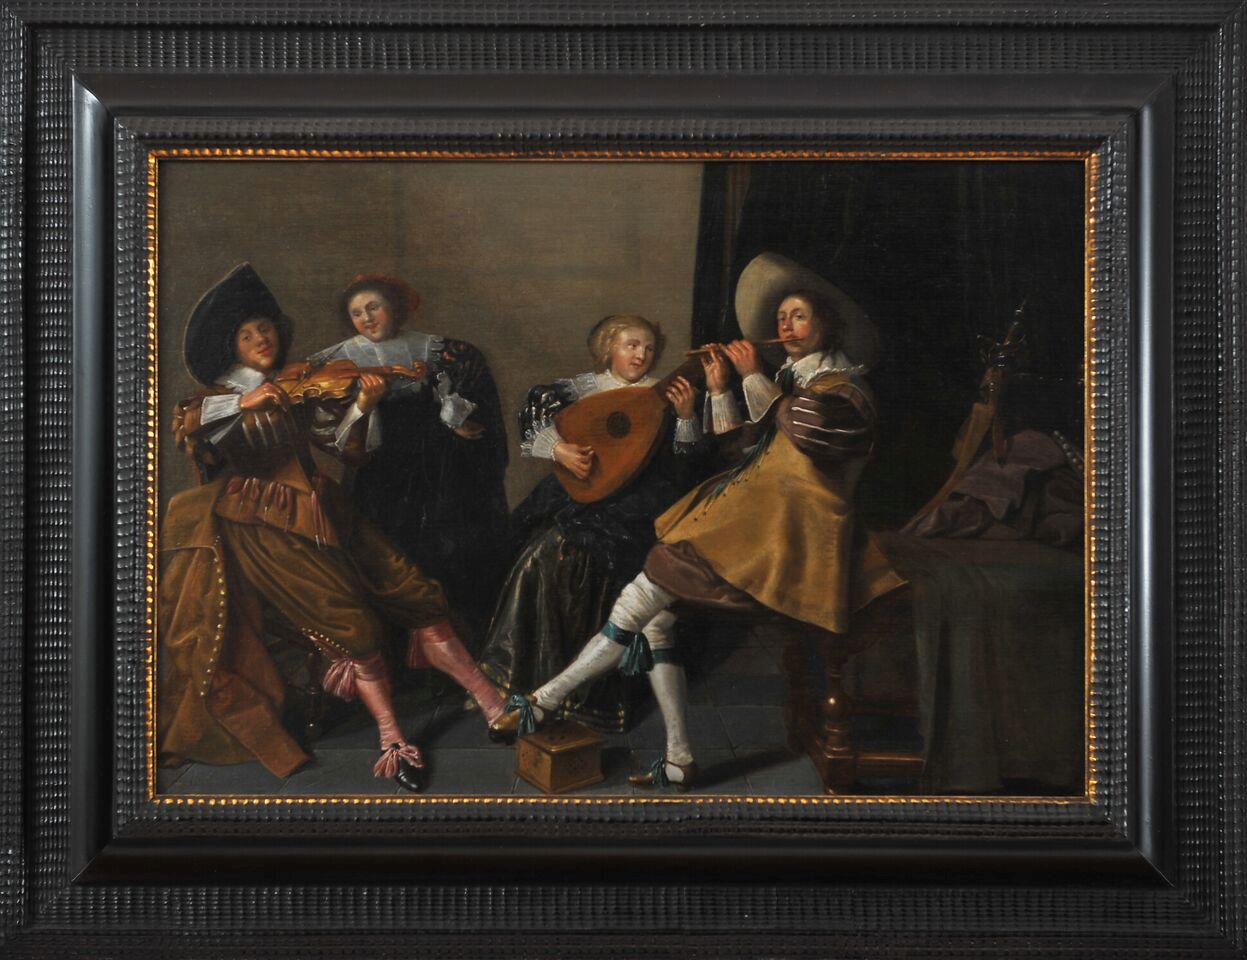 An Elegant Company Playing Music in an Interior